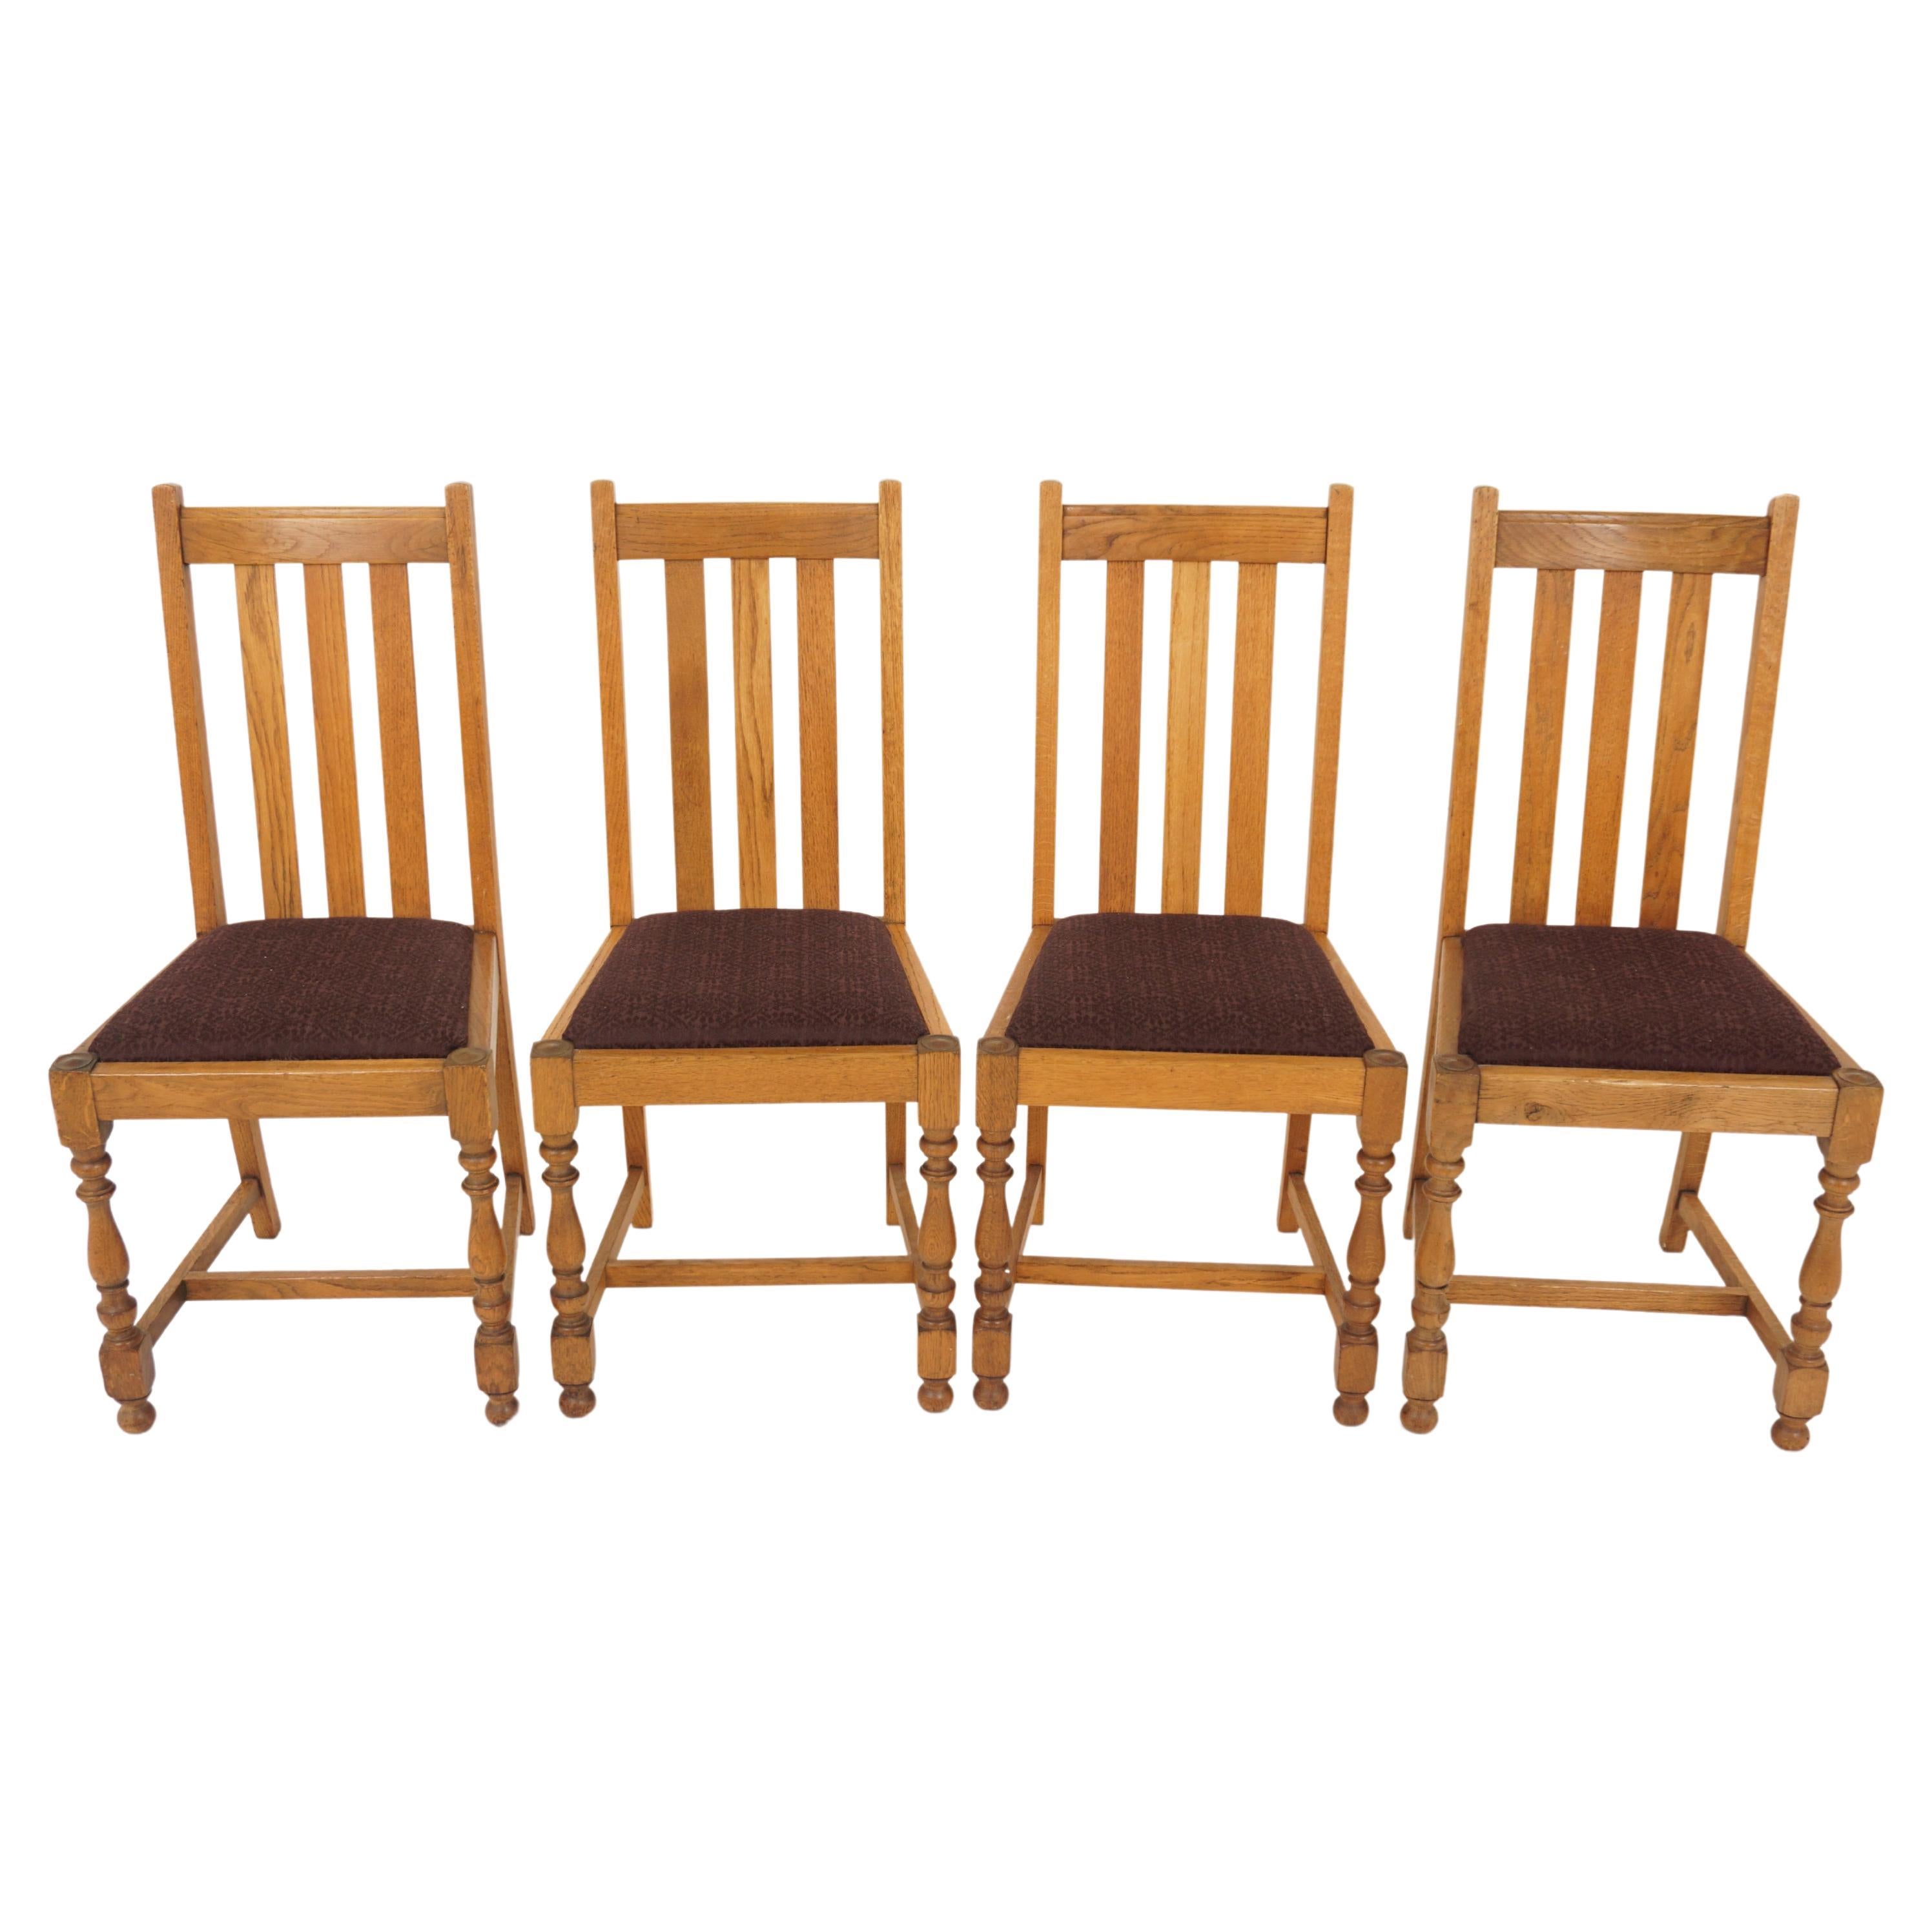 4 Vintage Solid Oak High Back Chairs, Lift Out Seats, Scotland 1920, H1201